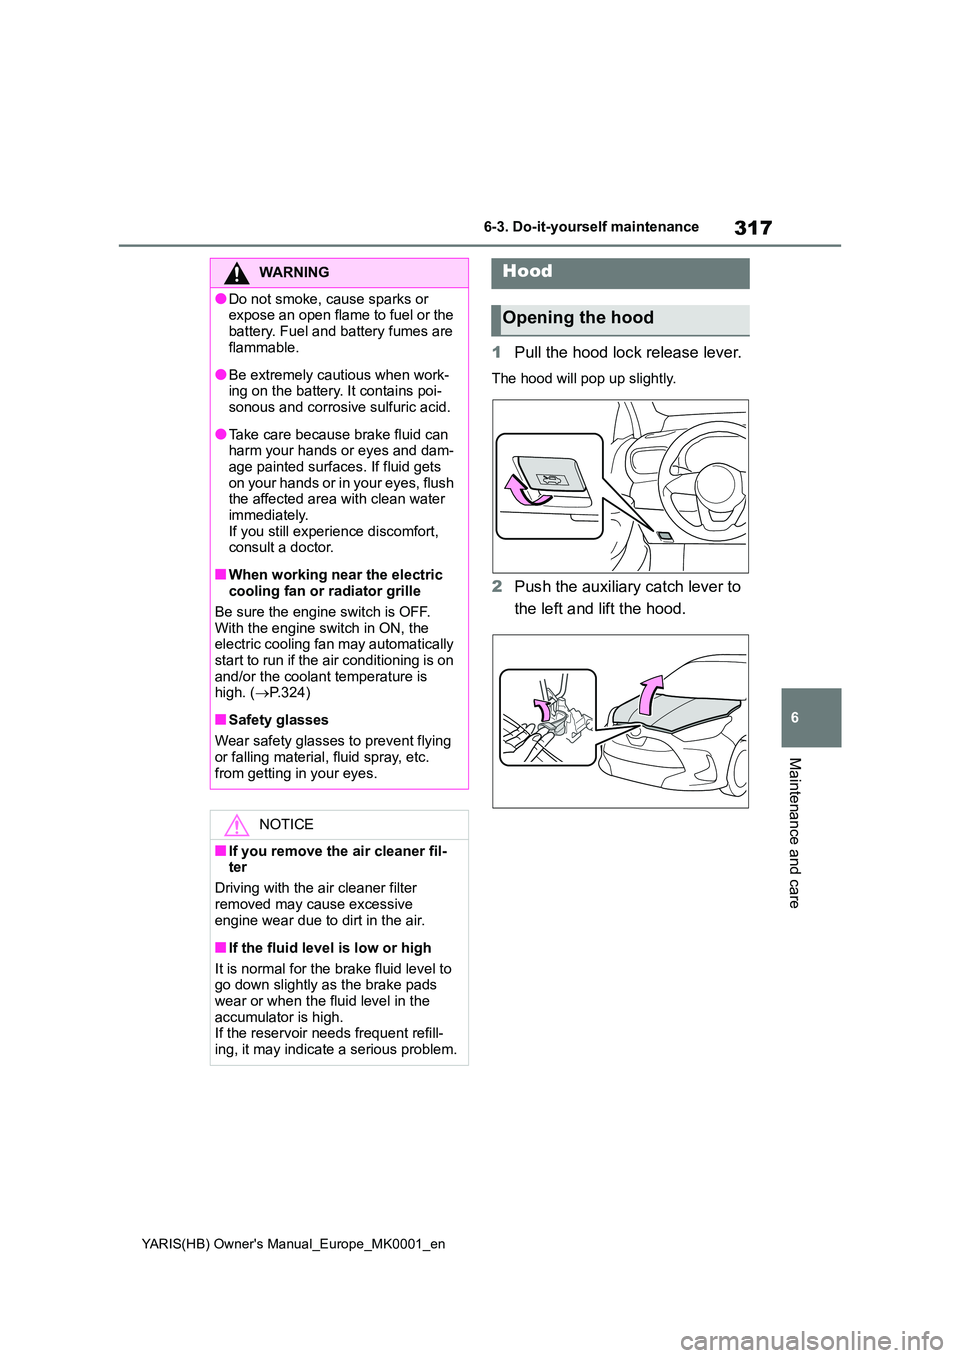 TOYOTA YARIS 2021  Owners Manual 317
6
YARIS(HB) Owners Manual_Europe_MK0001_en
6-3. Do-it-yourself maintenance
Maintenance and care
1Pull the hood lock release lever.
The hood will pop up slightly.
2Push the auxiliary catch lever t